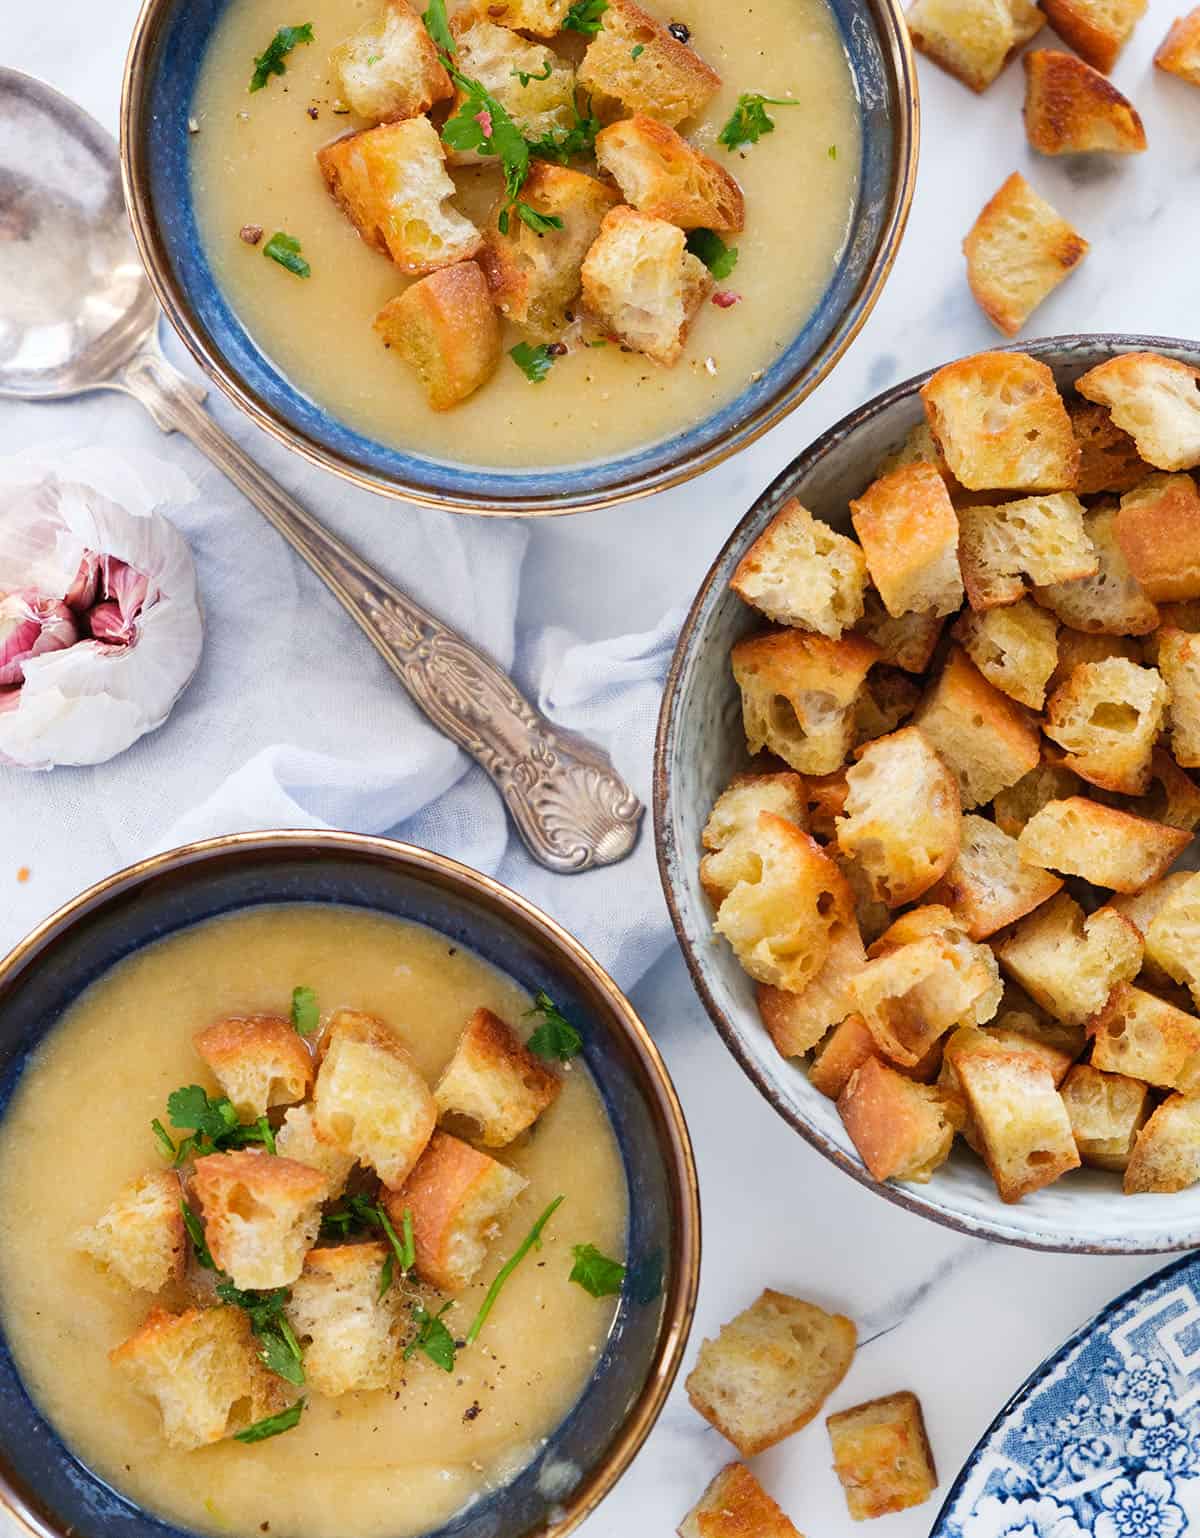 Top view of two bowls of soup served with crispy croutons.